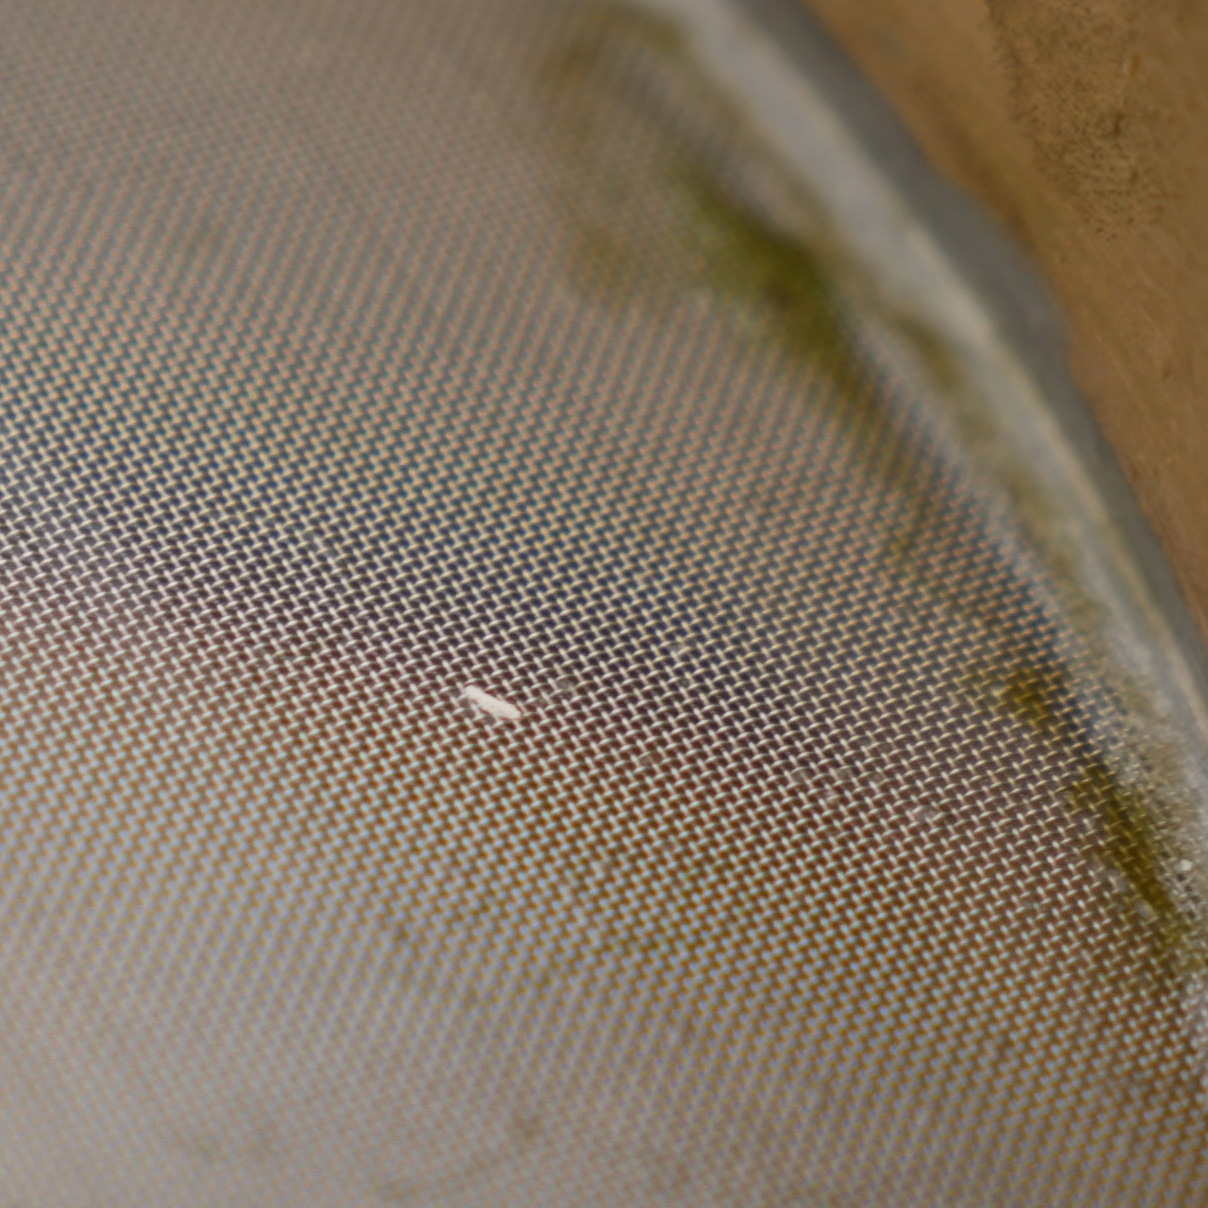 Close up image of microplastic material